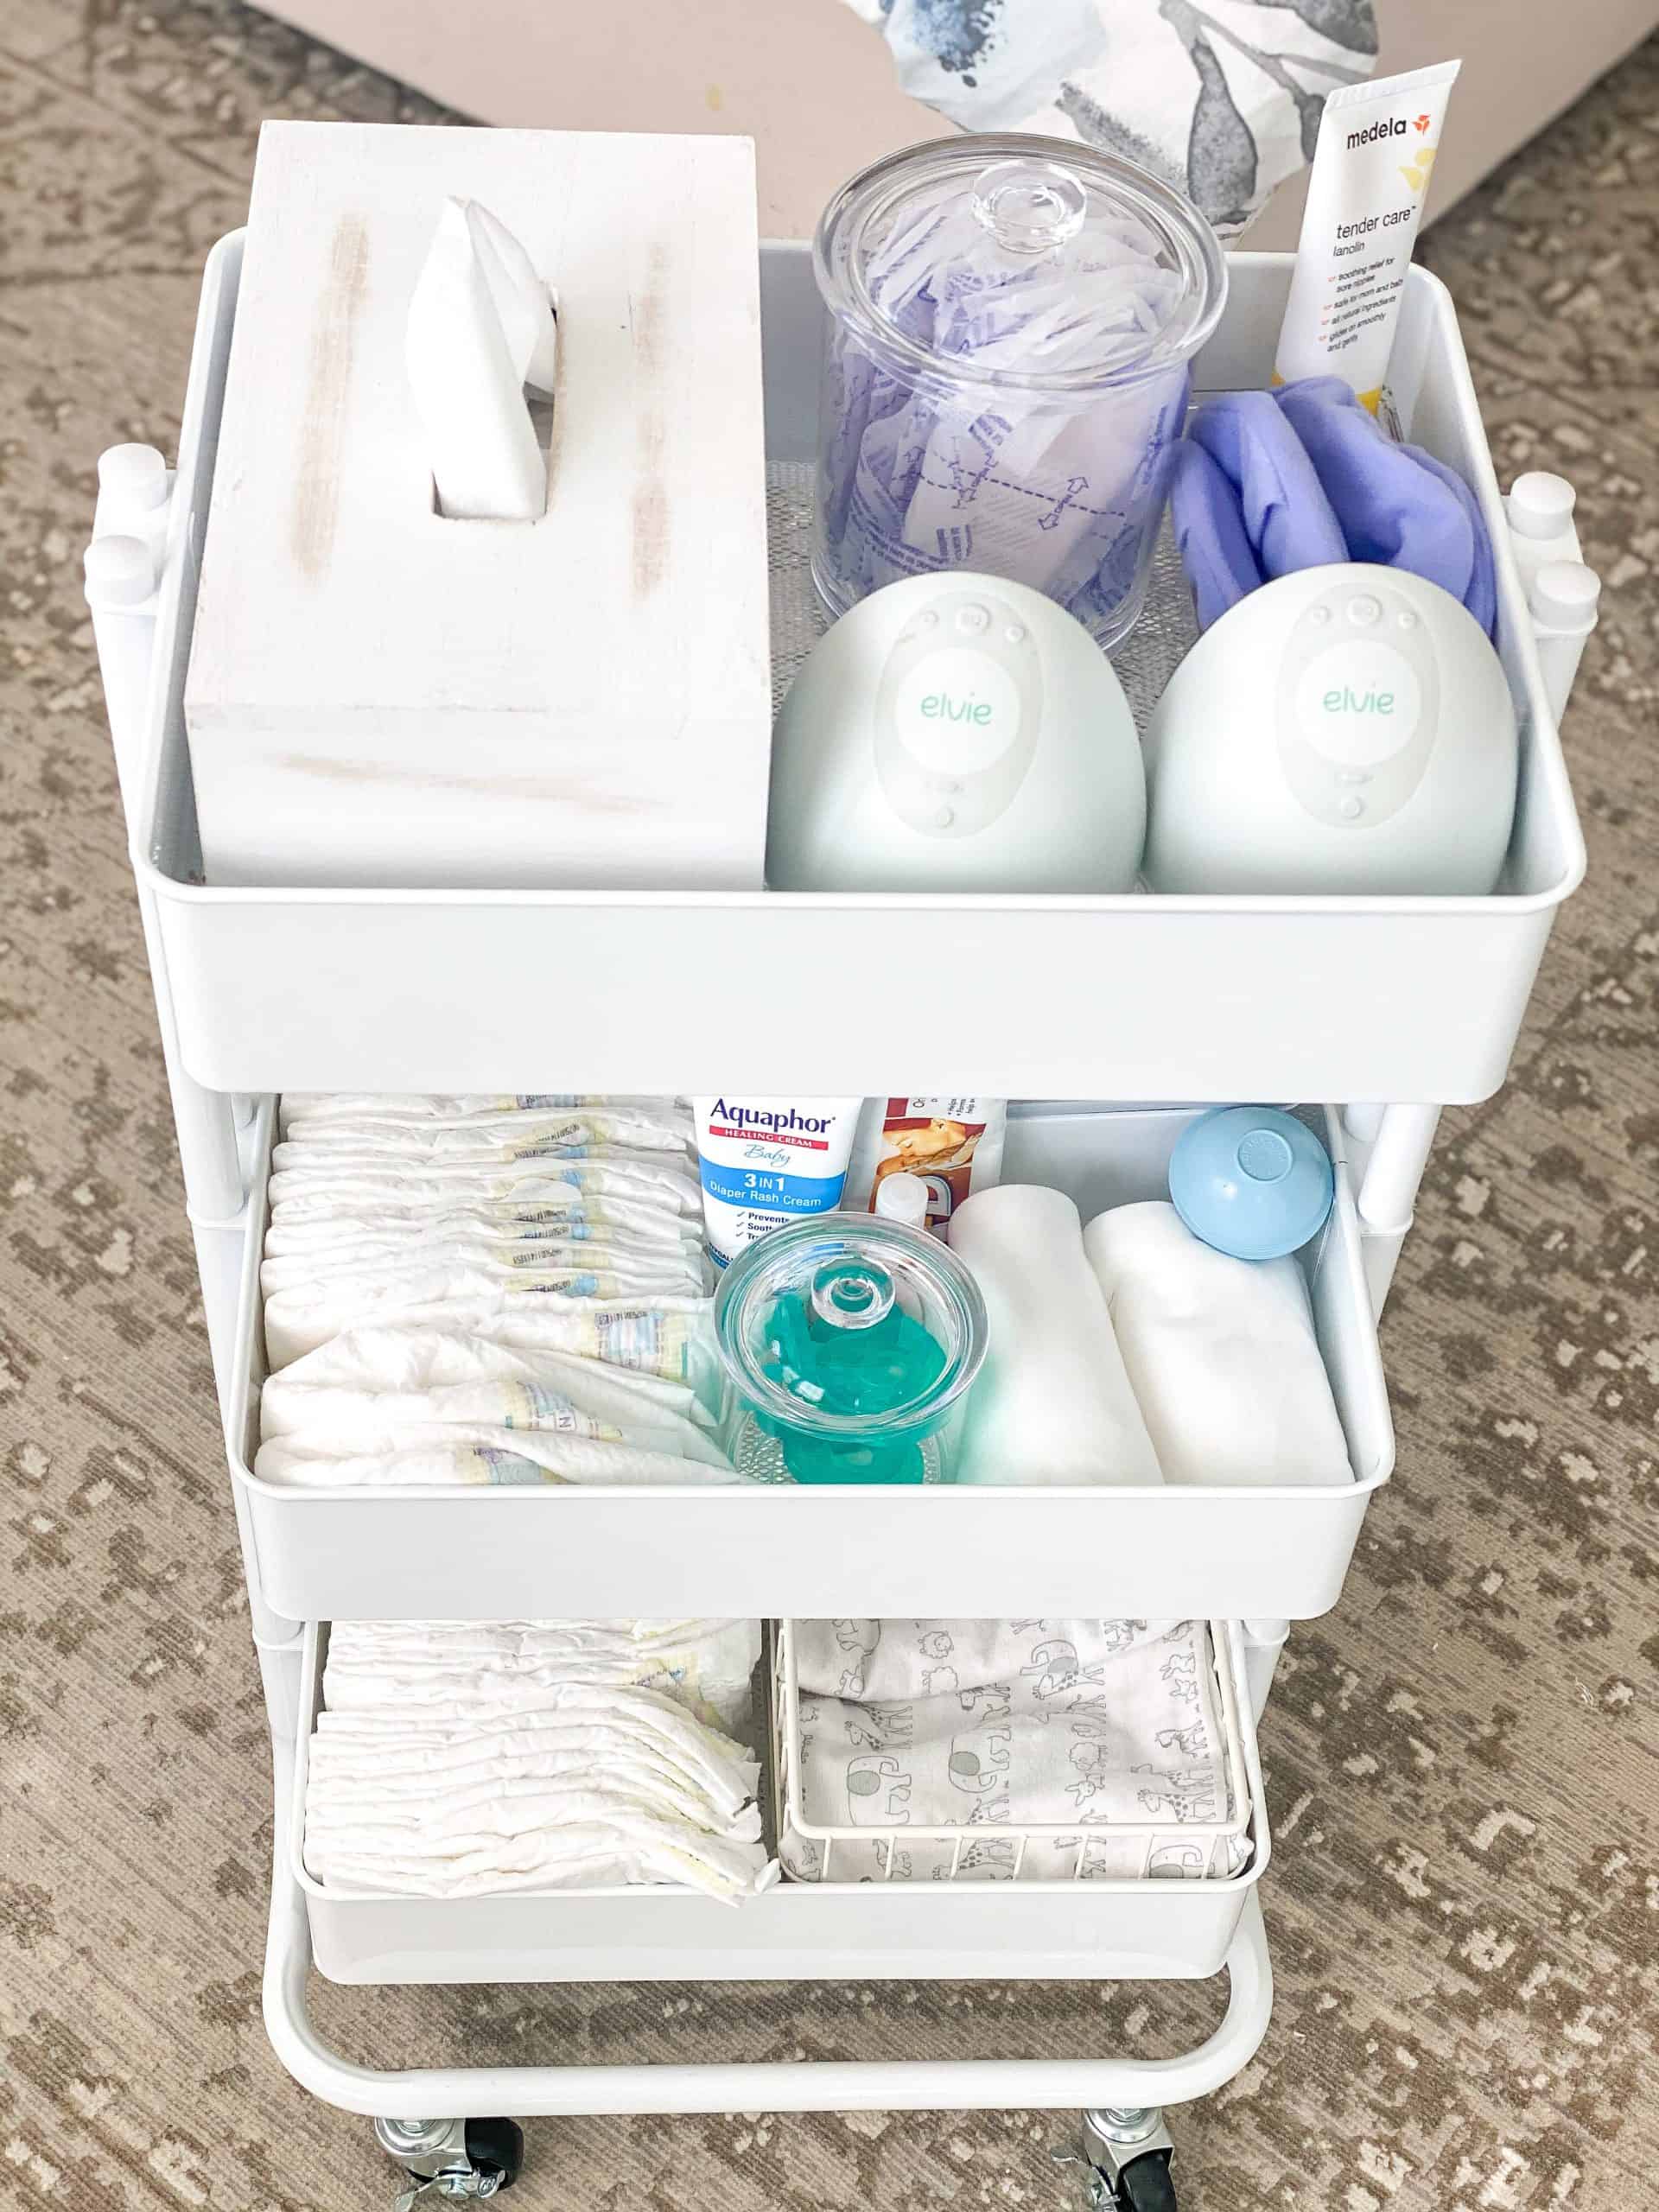 Newborn Cart by popular Dallas motherhood blog, Glamorous Versatility: image of a The Container Store White 3-Tier Rolling Cart, The Container Store White Stacking Wire Bins, Target Ubbi Wipes Dispenser, The Container Store Bliss Acrylic Canisters, The Container Store iDesign Linus Shallow Drawer Organizers, diapers, binkies, Aquaphor, A + D ointment, and burp cloths.  